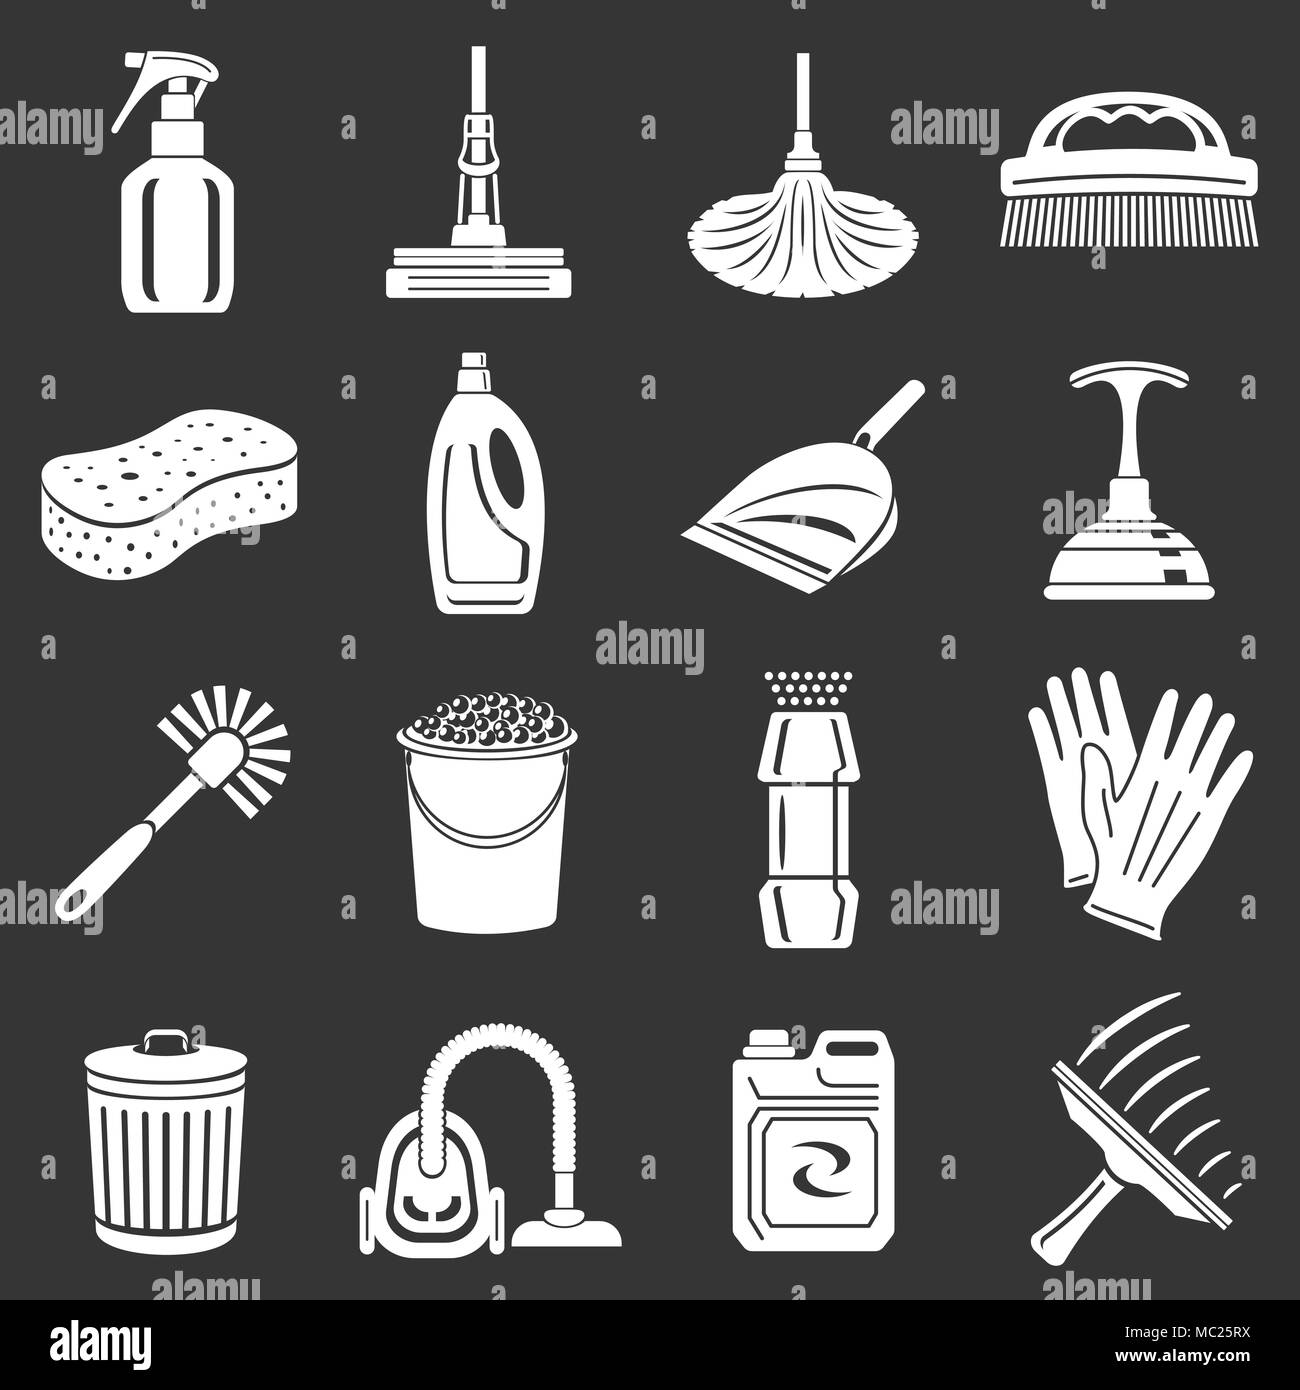 Cleaning icons set grey vector Stock Vector